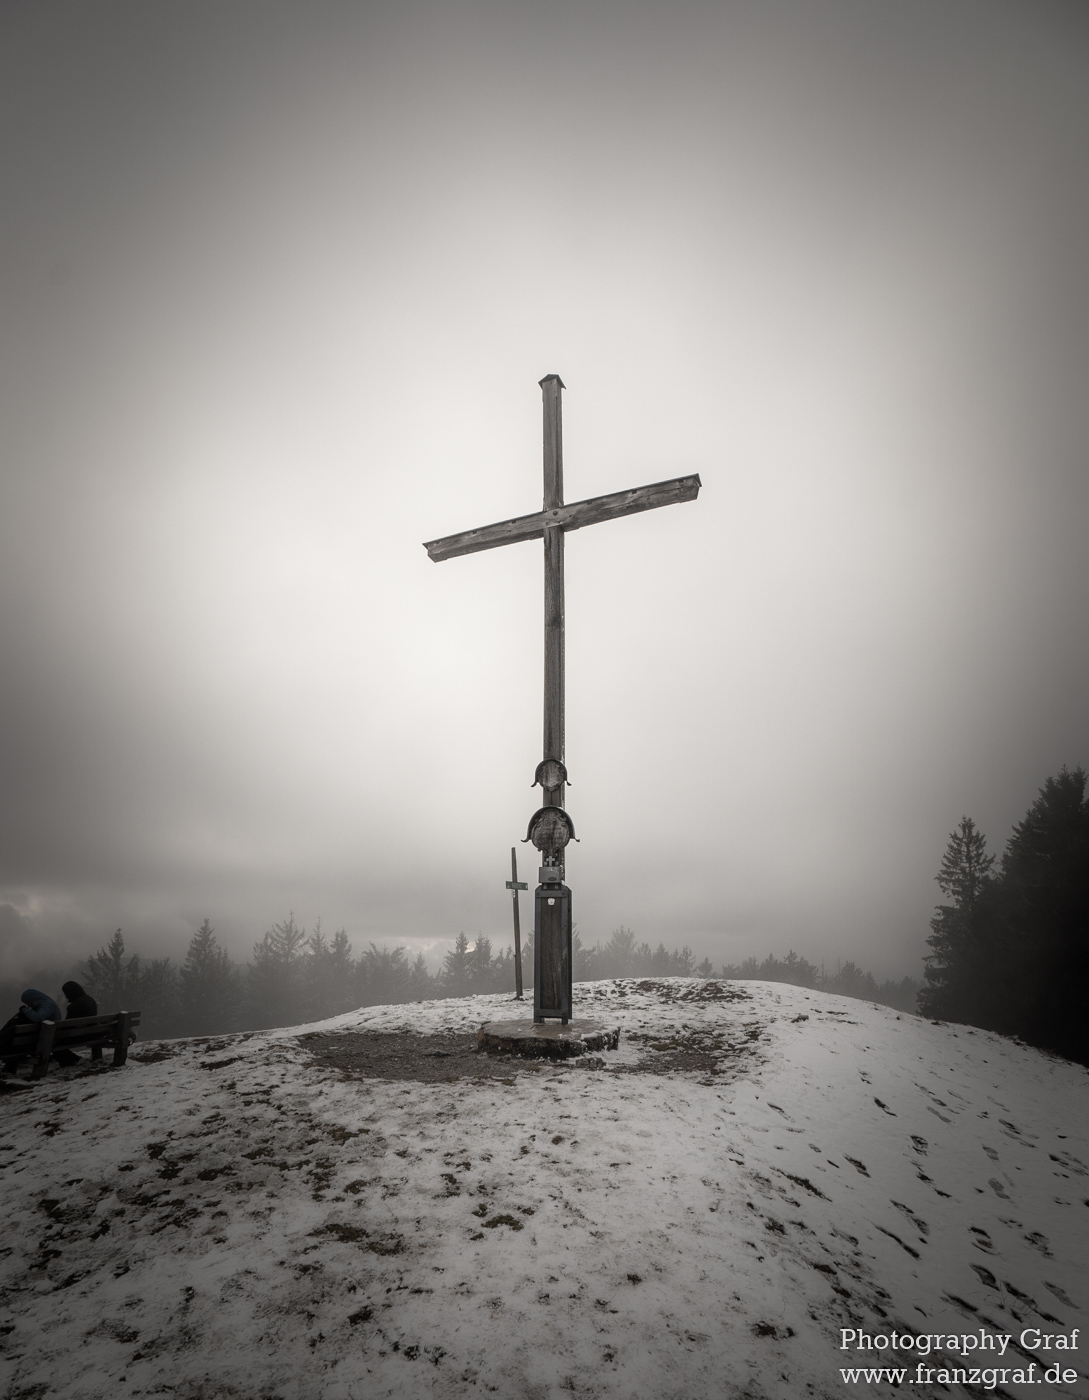 This image captures an evocative and serene winter scene, dominated by a large, solitary cross standing tall on a snowy hill. The sky overhead is vast and seems to blend seamlessly into the foggy landscape below, creating a hazy, dream-like atmosphere. The scene is devoid of vibrant colors, with varying shades of grey and white providing a monochromatic effect that further enhances the sense of solitude and tranquility. The ground beneath is blanketed in snow, dotted occasionally by gravestones, hinting that the cross might be a part of a cemetery. The image also features a street light, adding a slightly modern touch to the otherwise timeless setting. The overall mood of the picture is contemplative and somber, as if inviting viewers to pause and reflect.